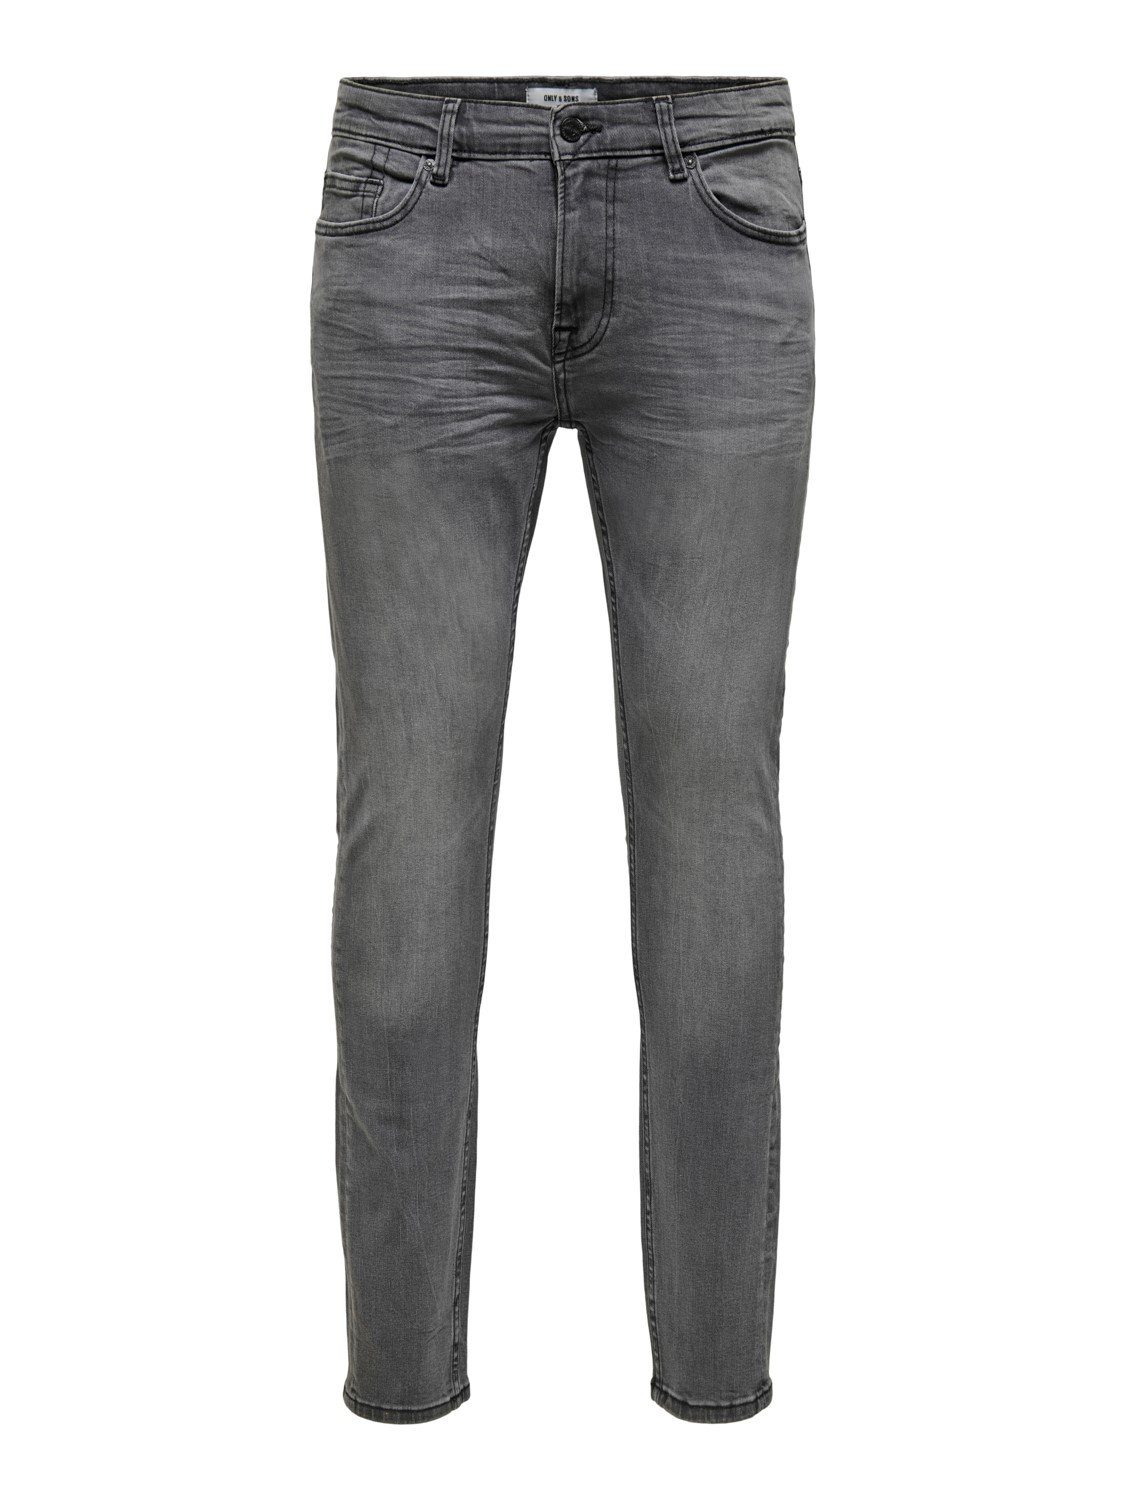 in (1-tlg) Jeans Grau Slim-fit-Jeans Washed SONS Pants ONLY Basic Denim Stoned Fit Skinny & ONSWARP 3977 Hose